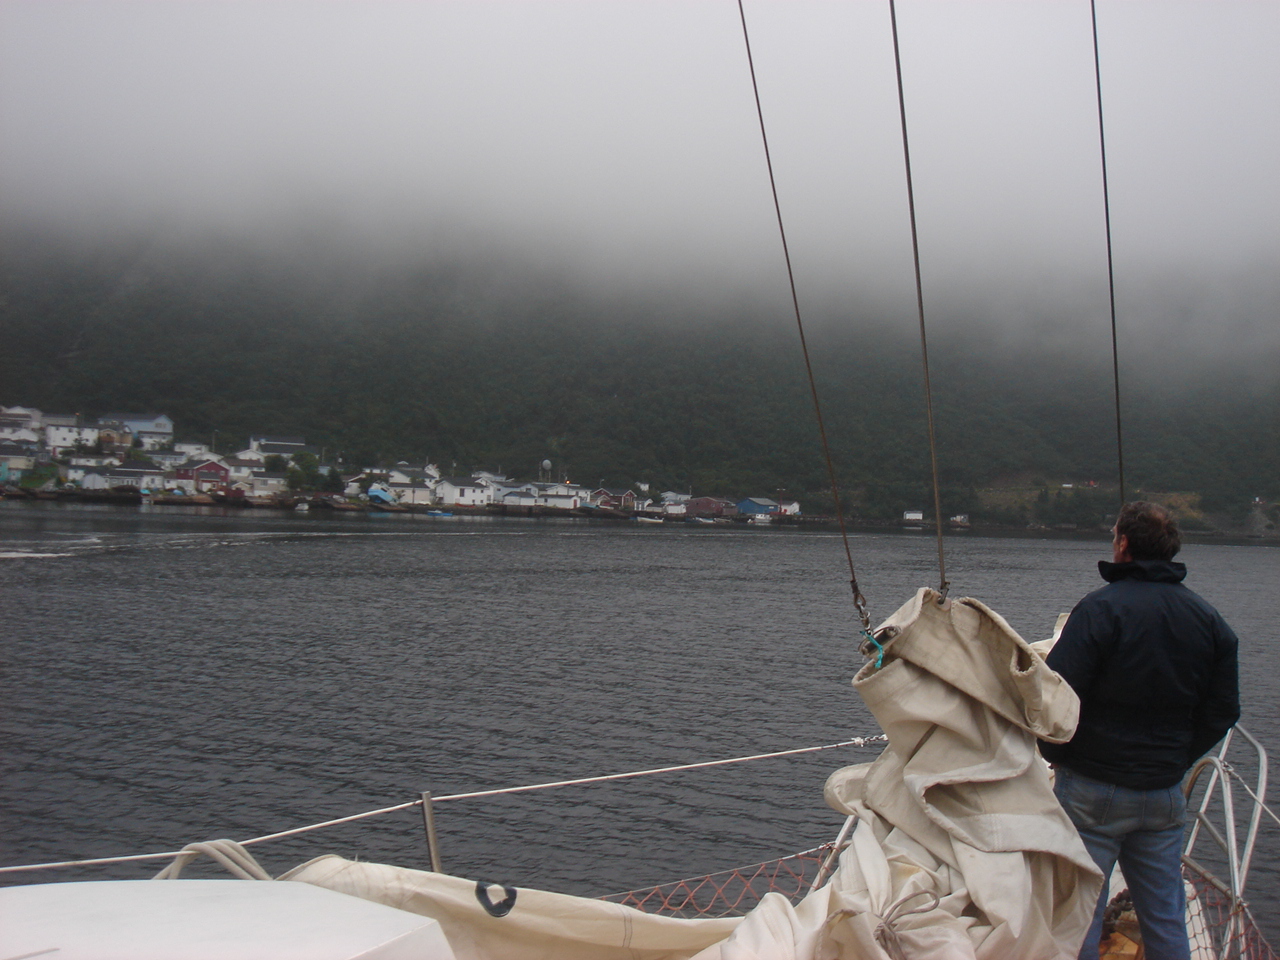 fog, gale, or doldrums...take your pick!